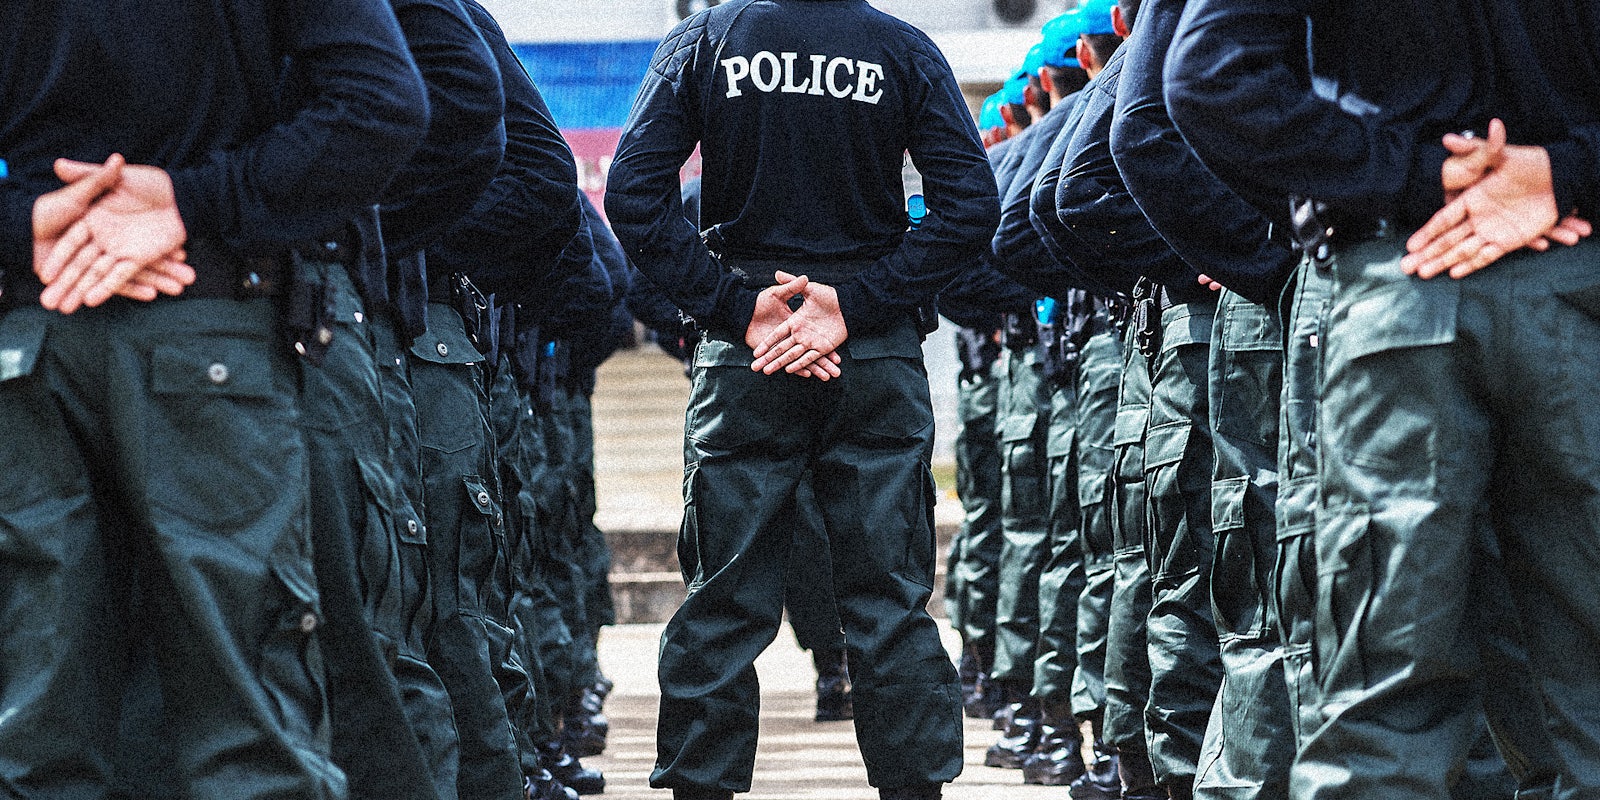 Police officers standing in formation.